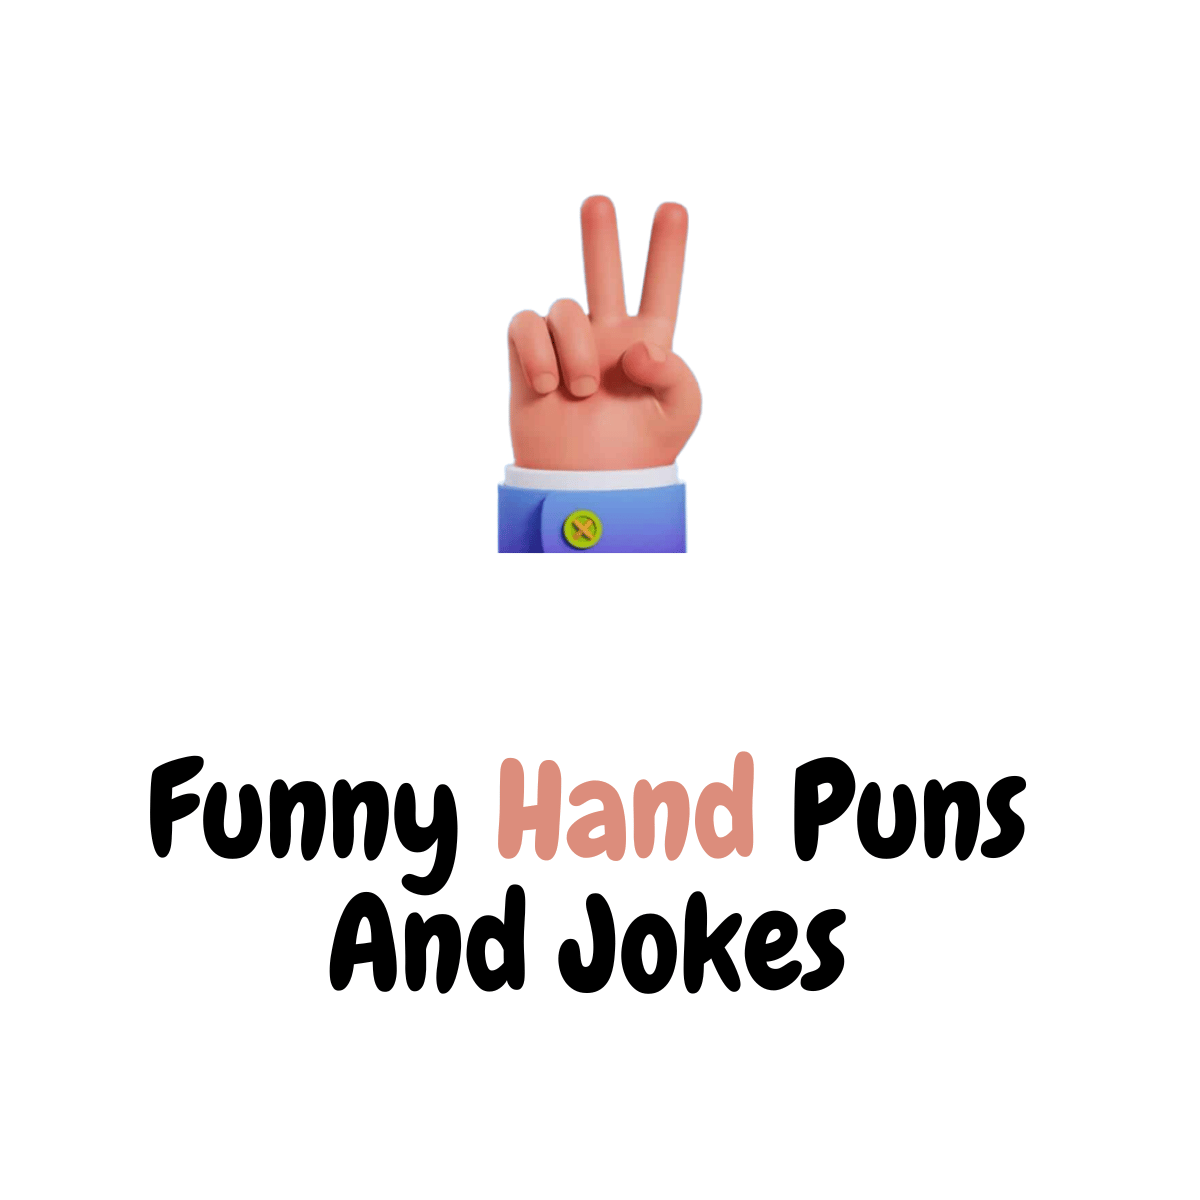 https://funniestpuns.com/wp-content/uploads/2023/06/Funny-Hand-Puns-And-Jokes.png